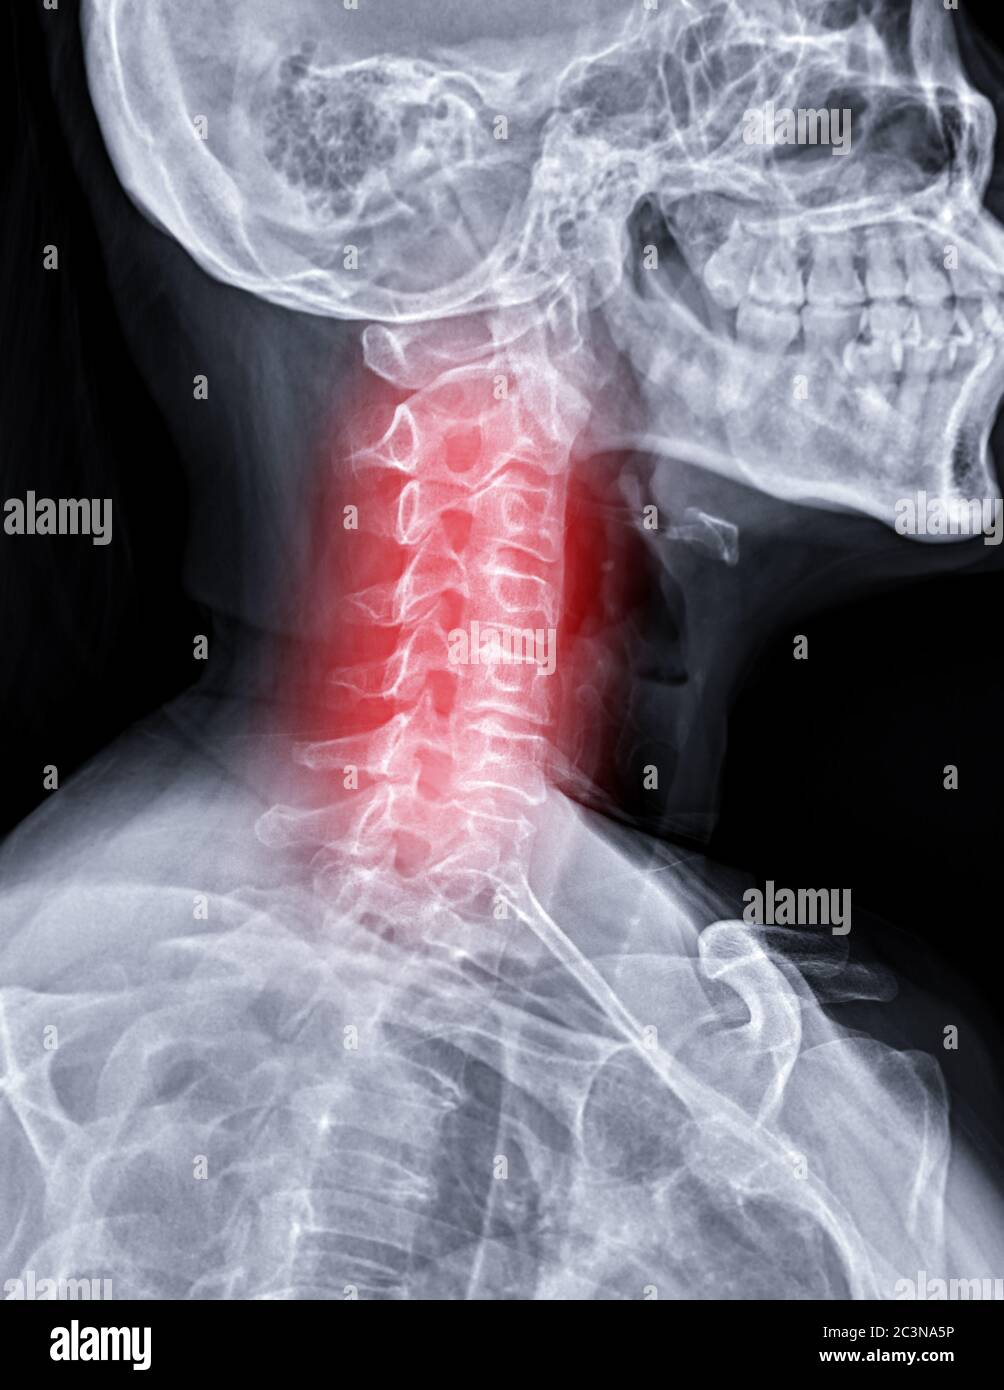 X-ray C-spine or x-ray image of Cervical spine oblique view for diagnostic intervertebral disc herniation. Stock Photo